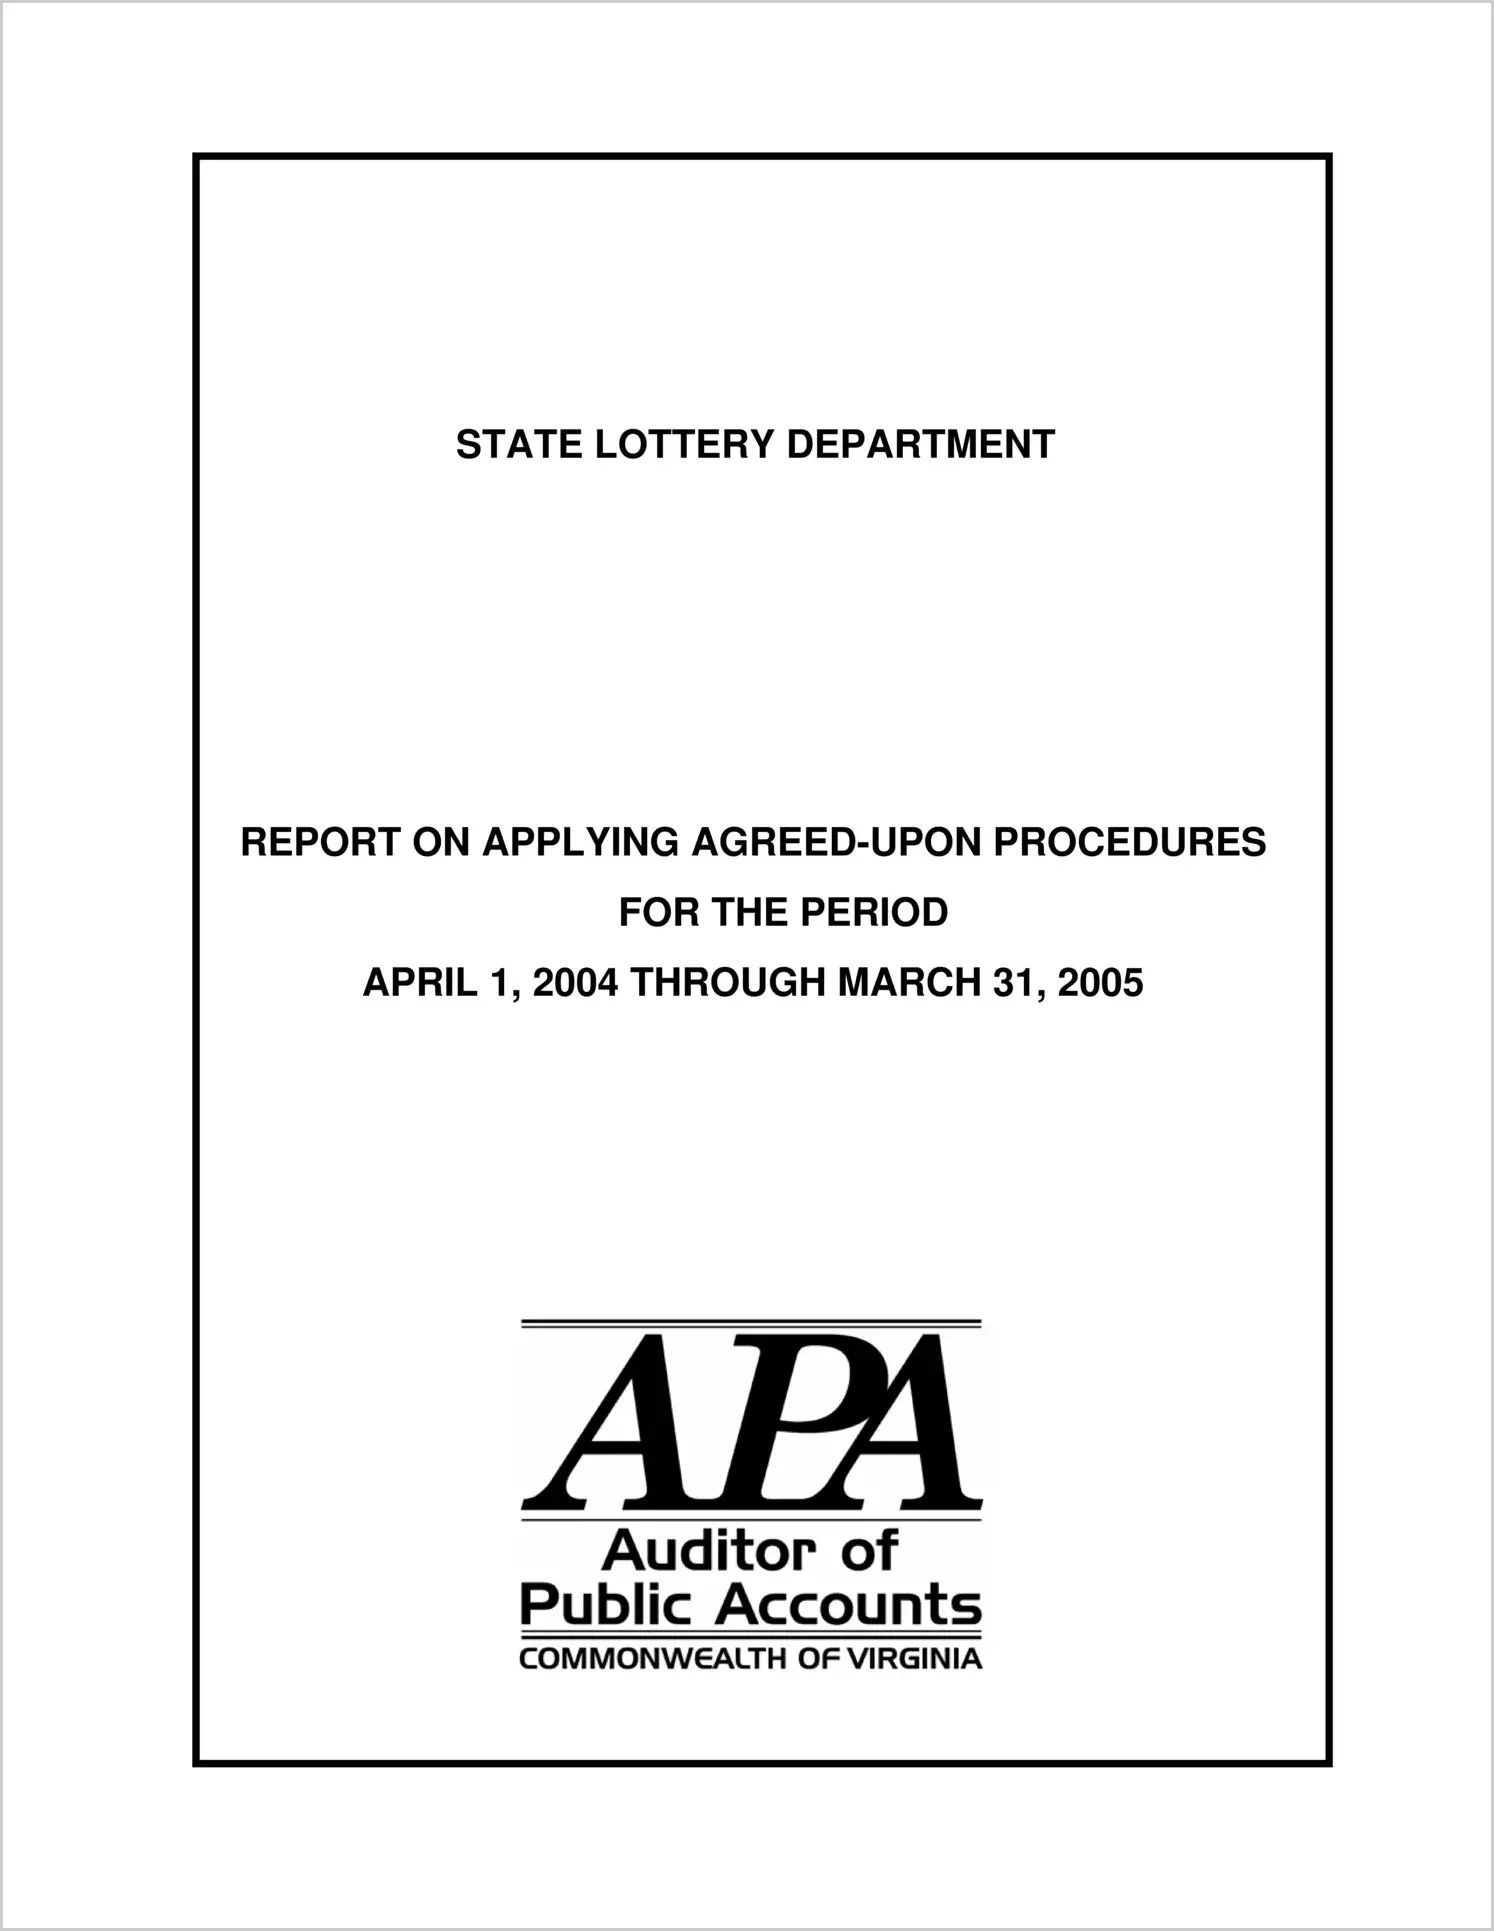 State Lottery Department Report on Applying Agreed-Upon Procedures (Mega Millions)